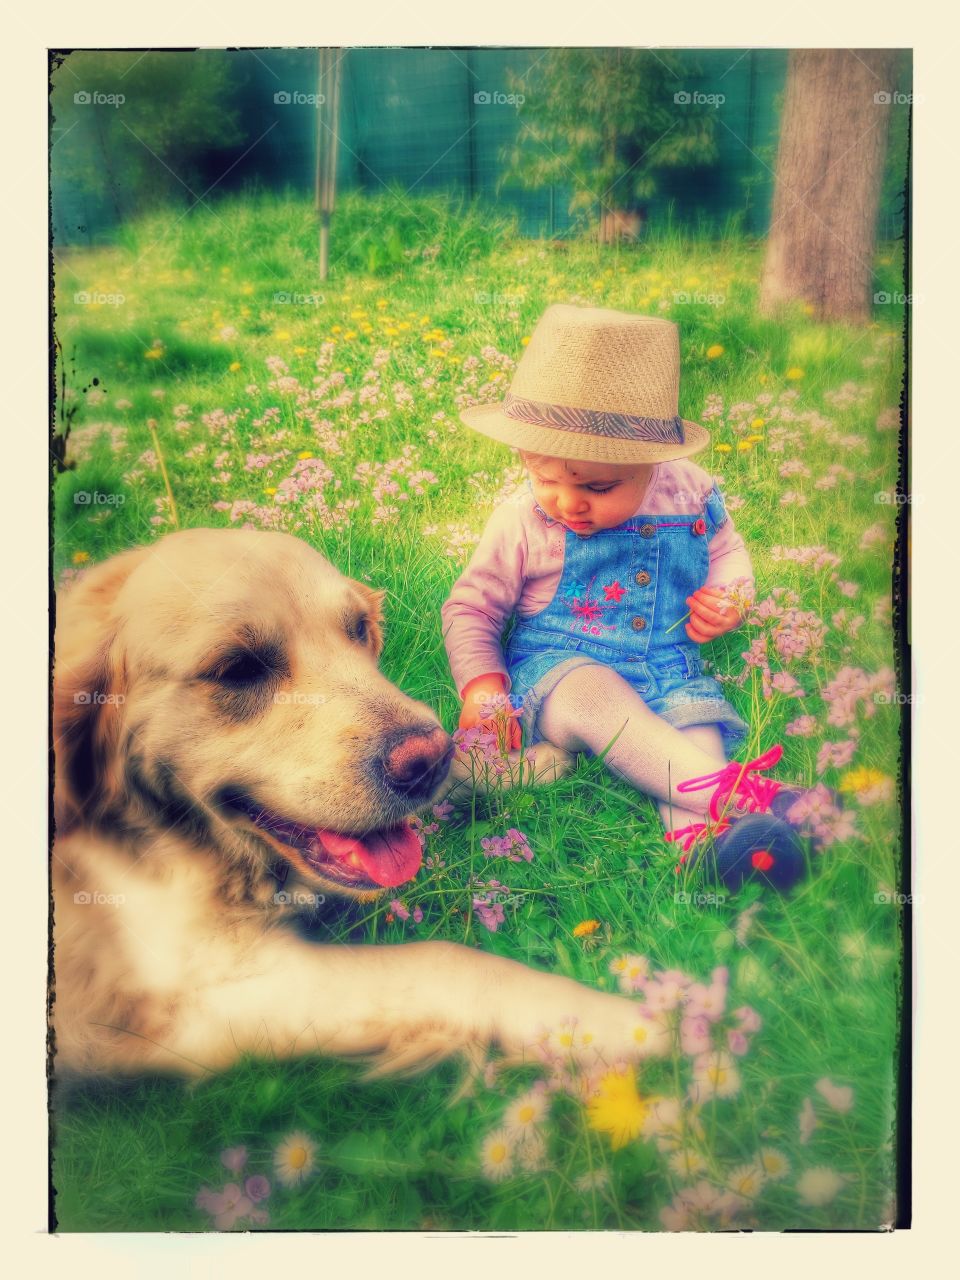 Cute wearing hat and sitting with dog in the grassy field